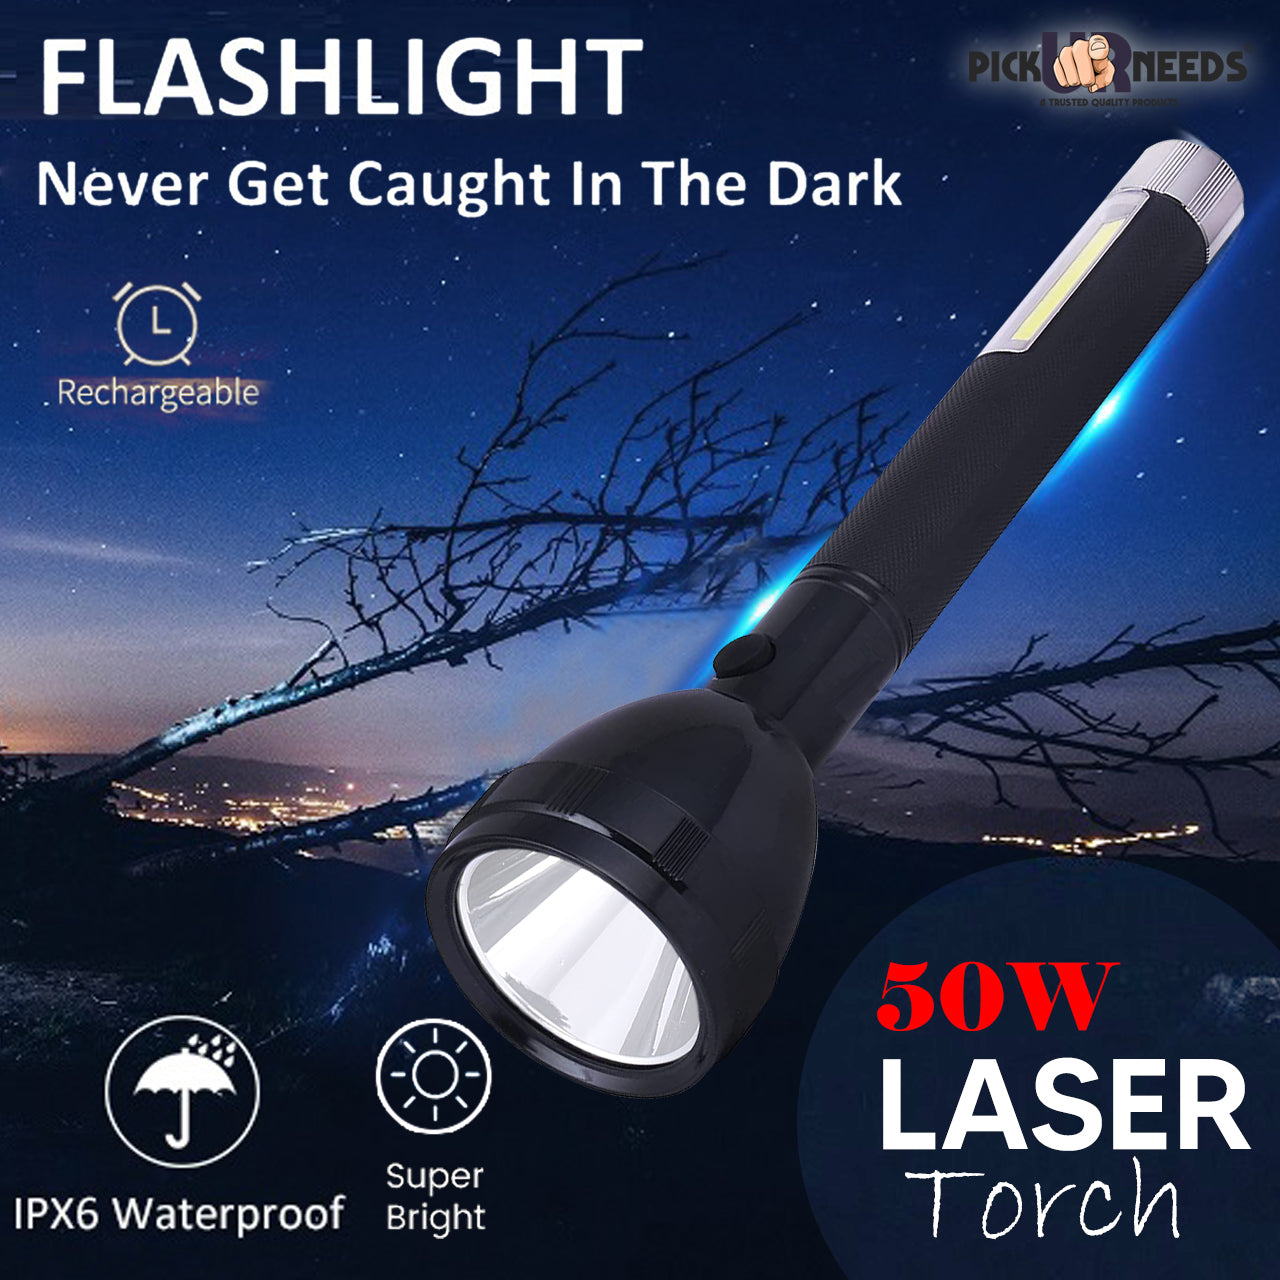 Pick Ur Needs Lithium Battery Long Range Led torch Light Rechargeable with 2000mAh Battery Torch  (Black, 27 cm, Rechargeable)